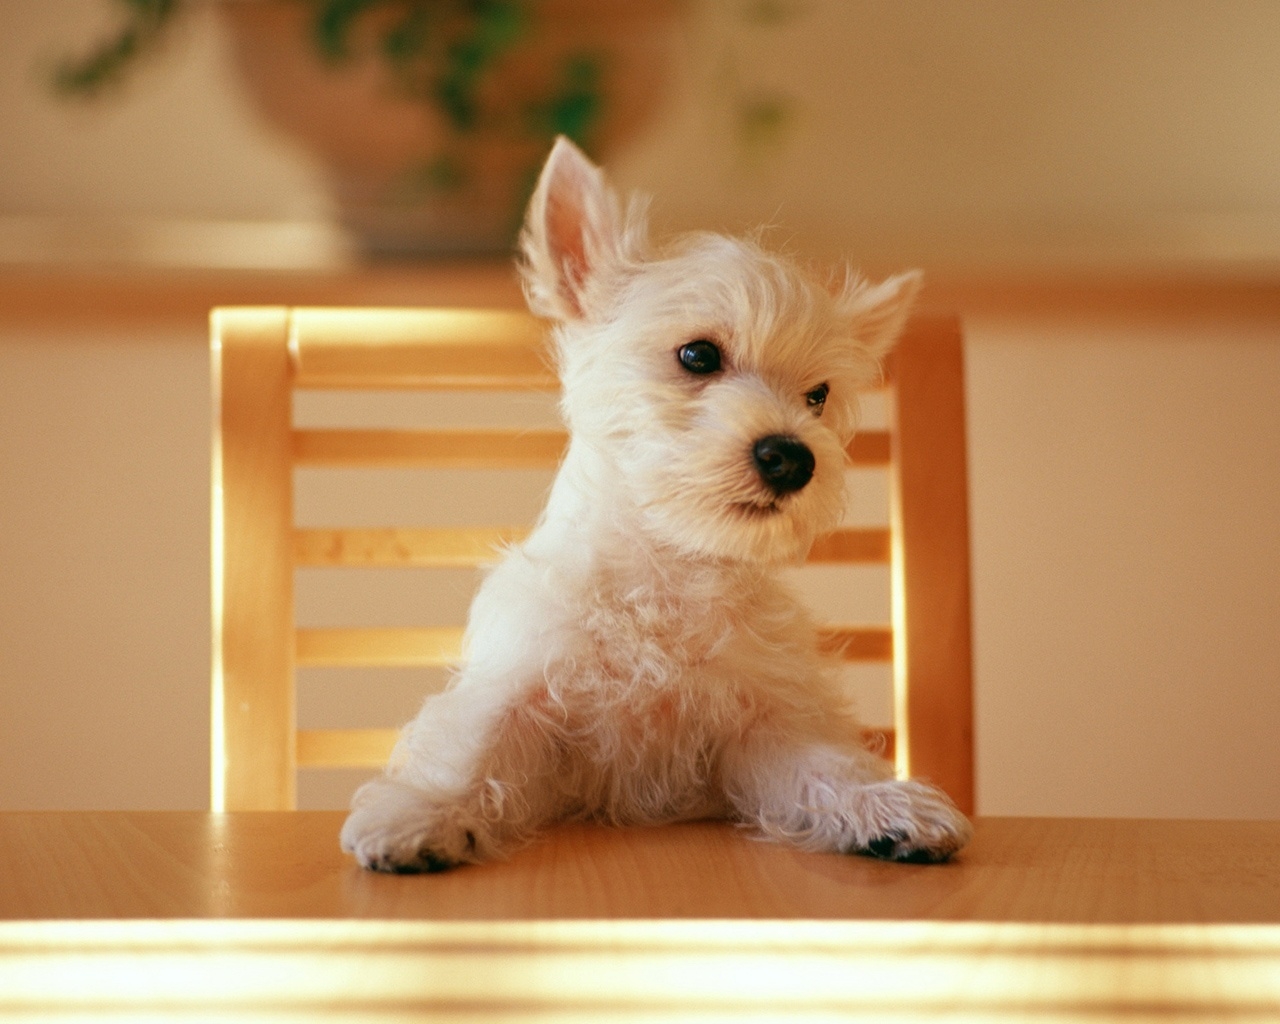 Dog at the table for 1280 x 1024 resolution